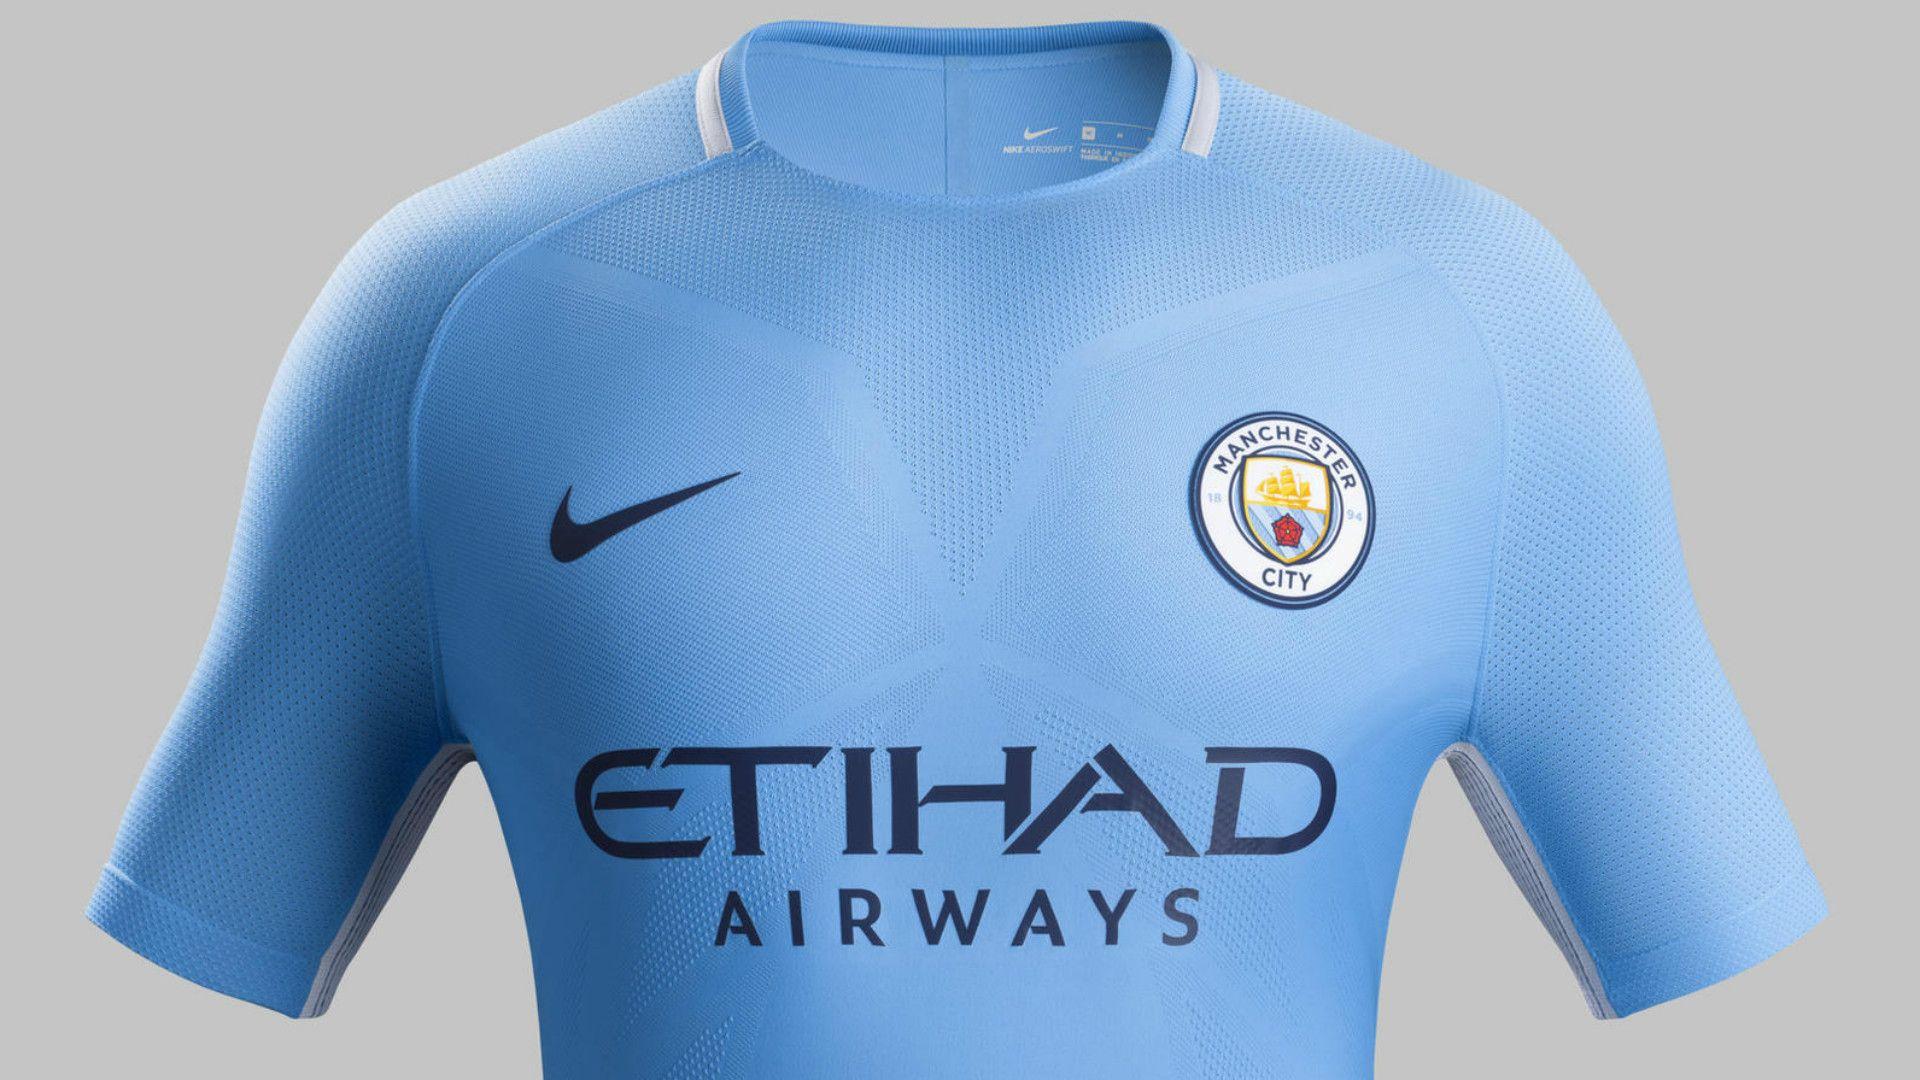 Man City 2017 18 Kit: Manchester City Unveil New Jersey For 2017